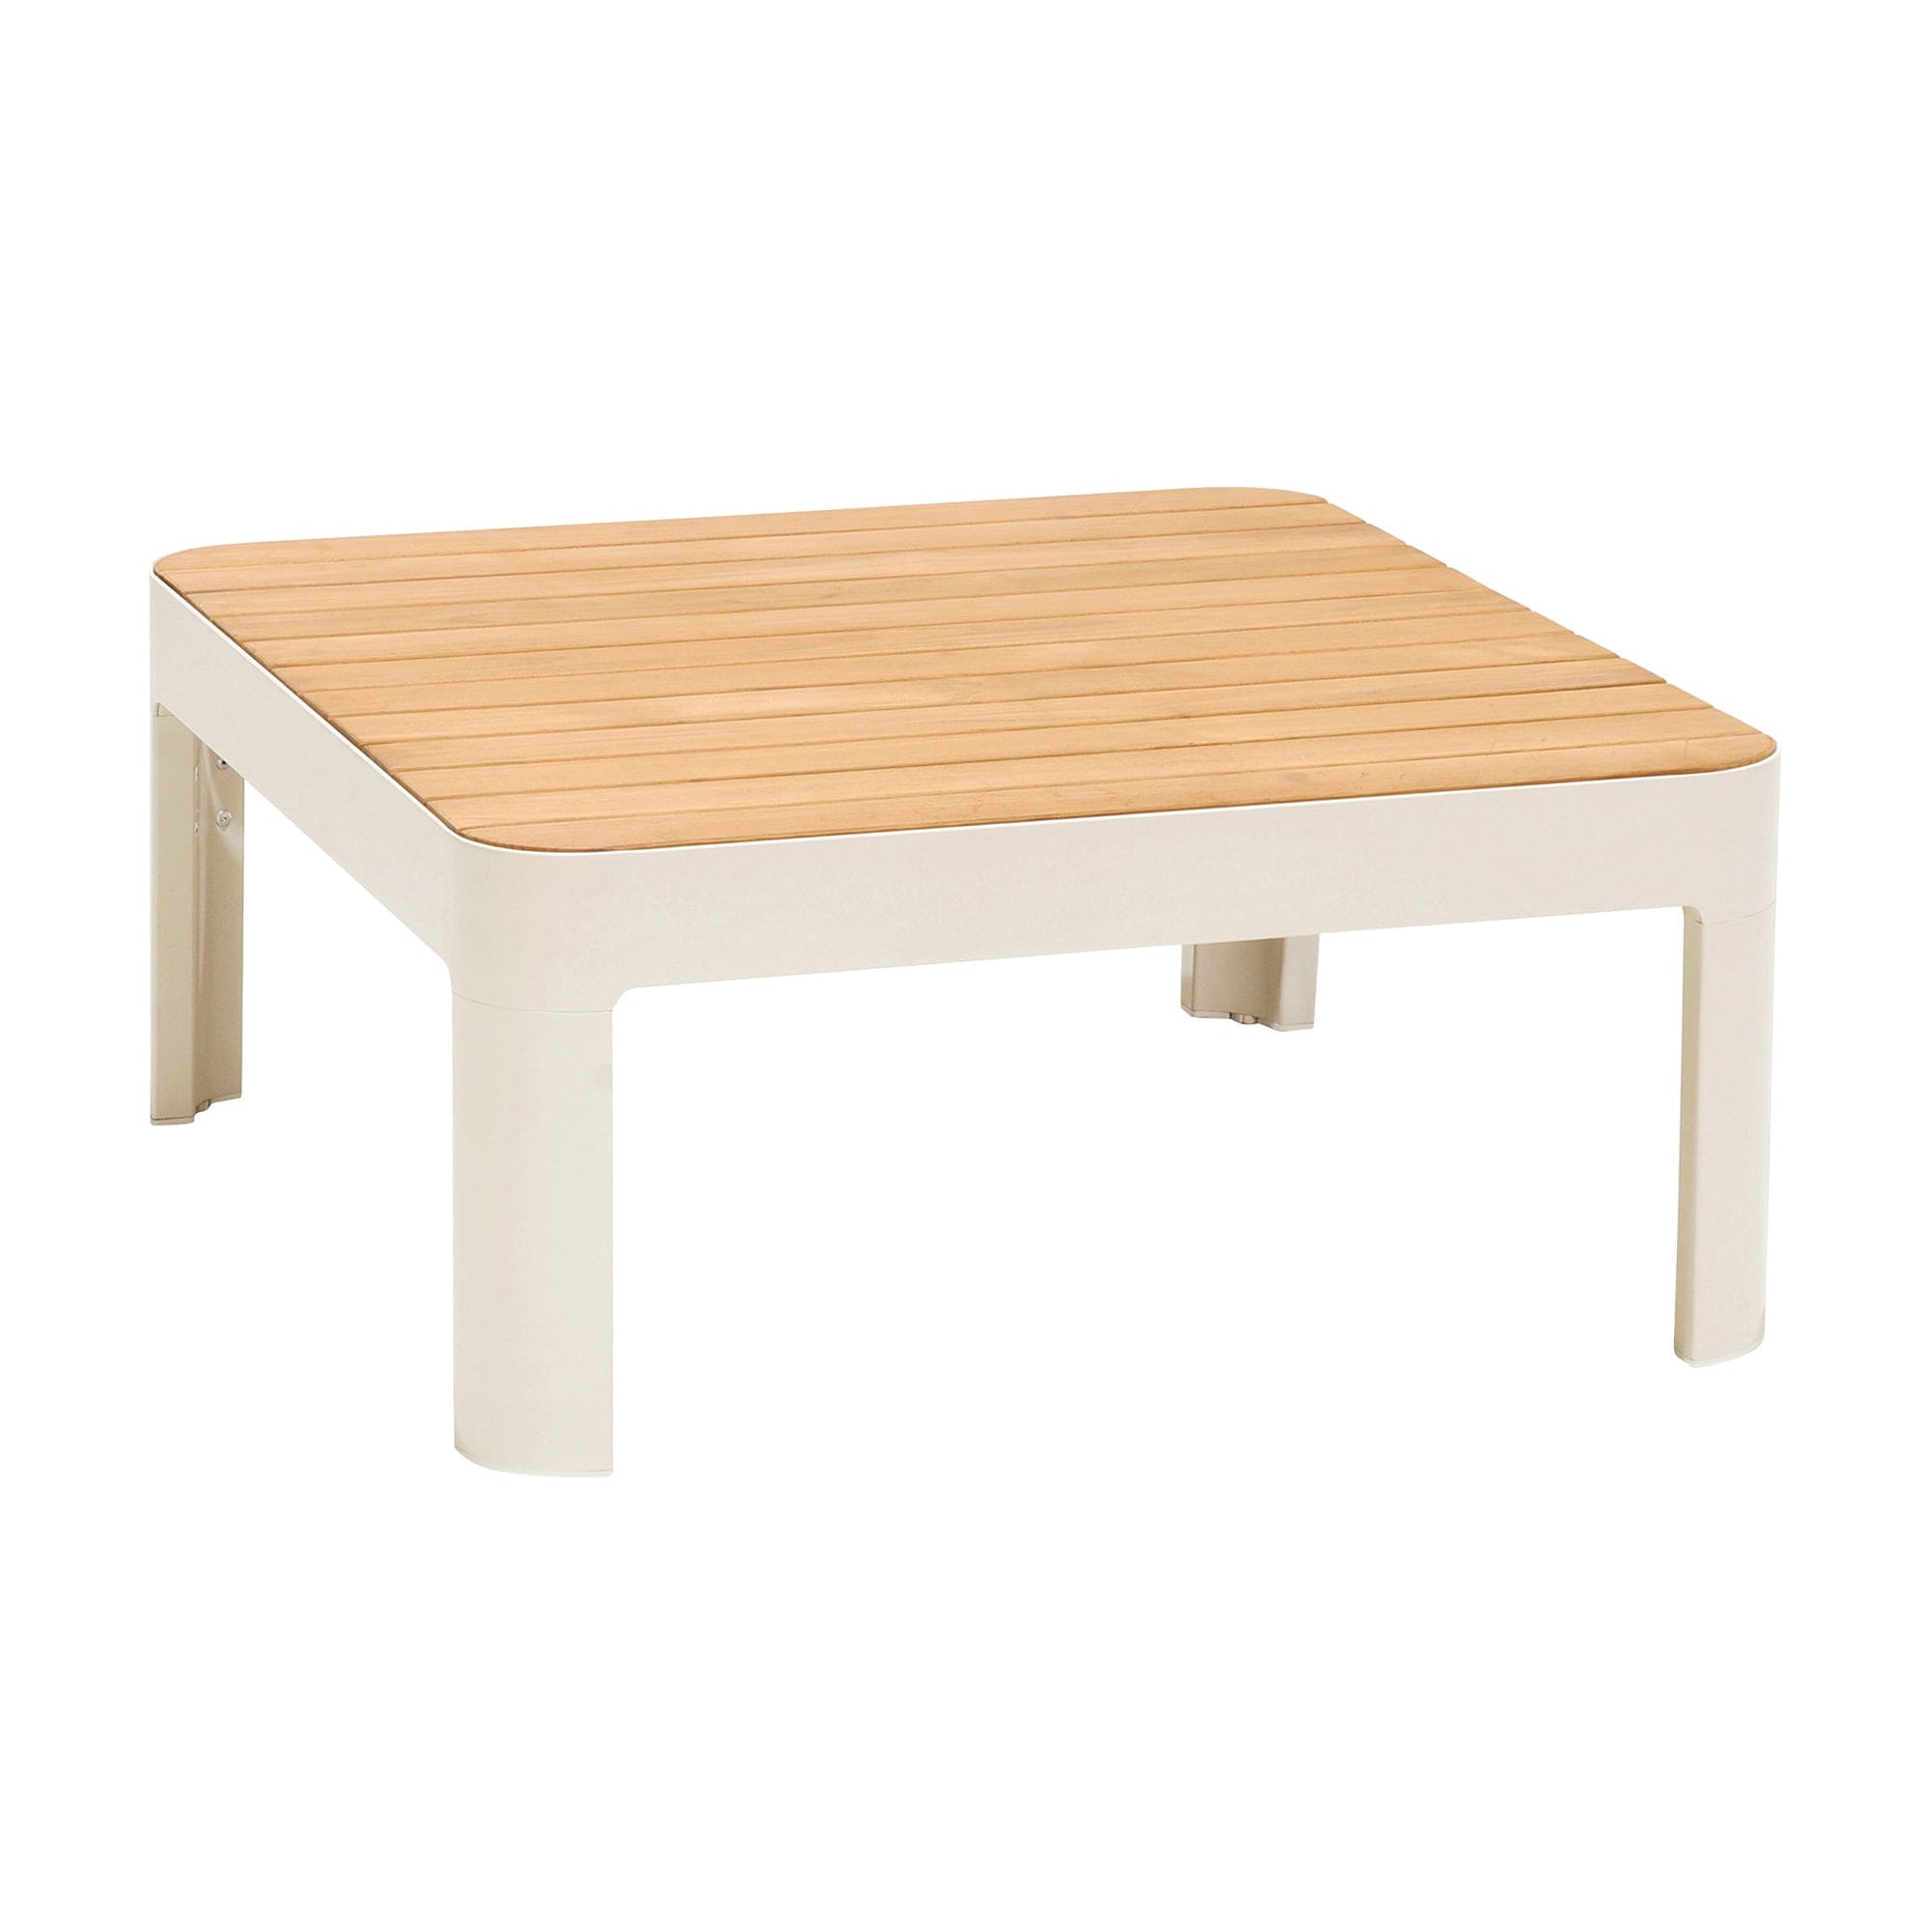 Armen Living Outdoor Coffee Table Armen Living | Portals Outdoor Square Coffee Table in Light Matte Sand Finish with Natural Teak Wood Top | LCPLCONAT